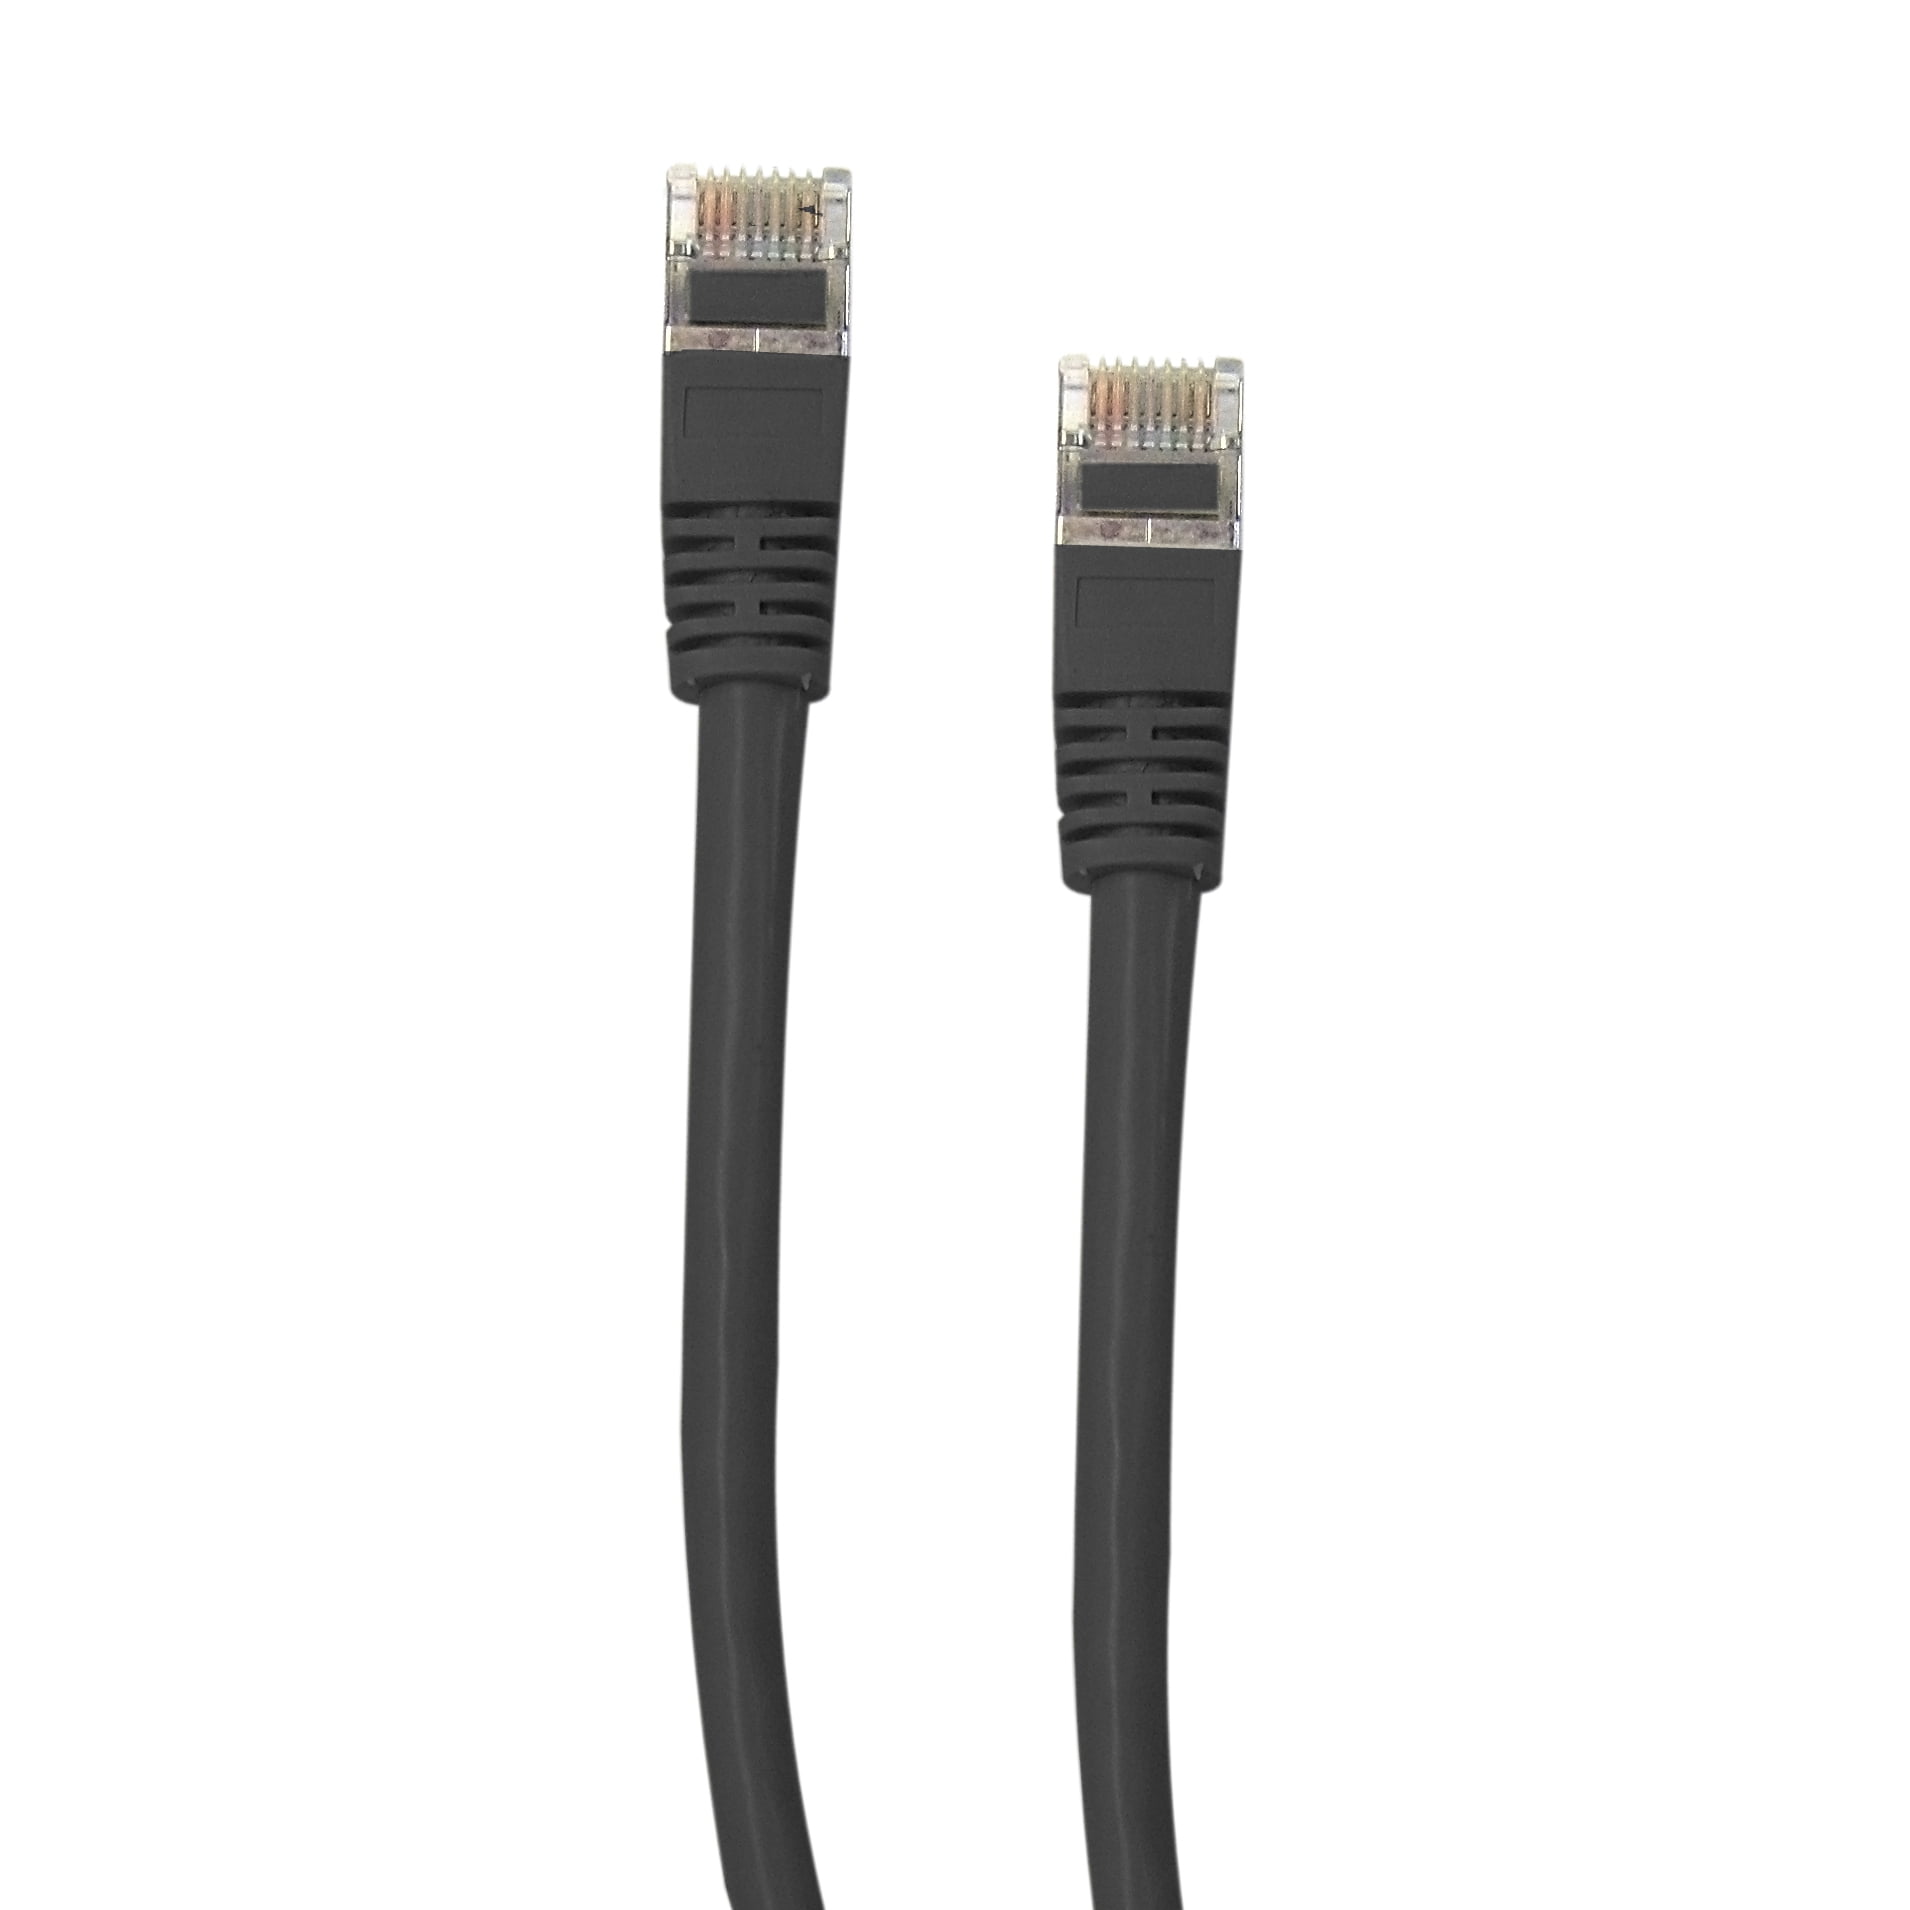 6 Inch Blue, eDragon Cat5e Ethernet Patch Cable with Snagless/Molded Boot, 2 Pack 